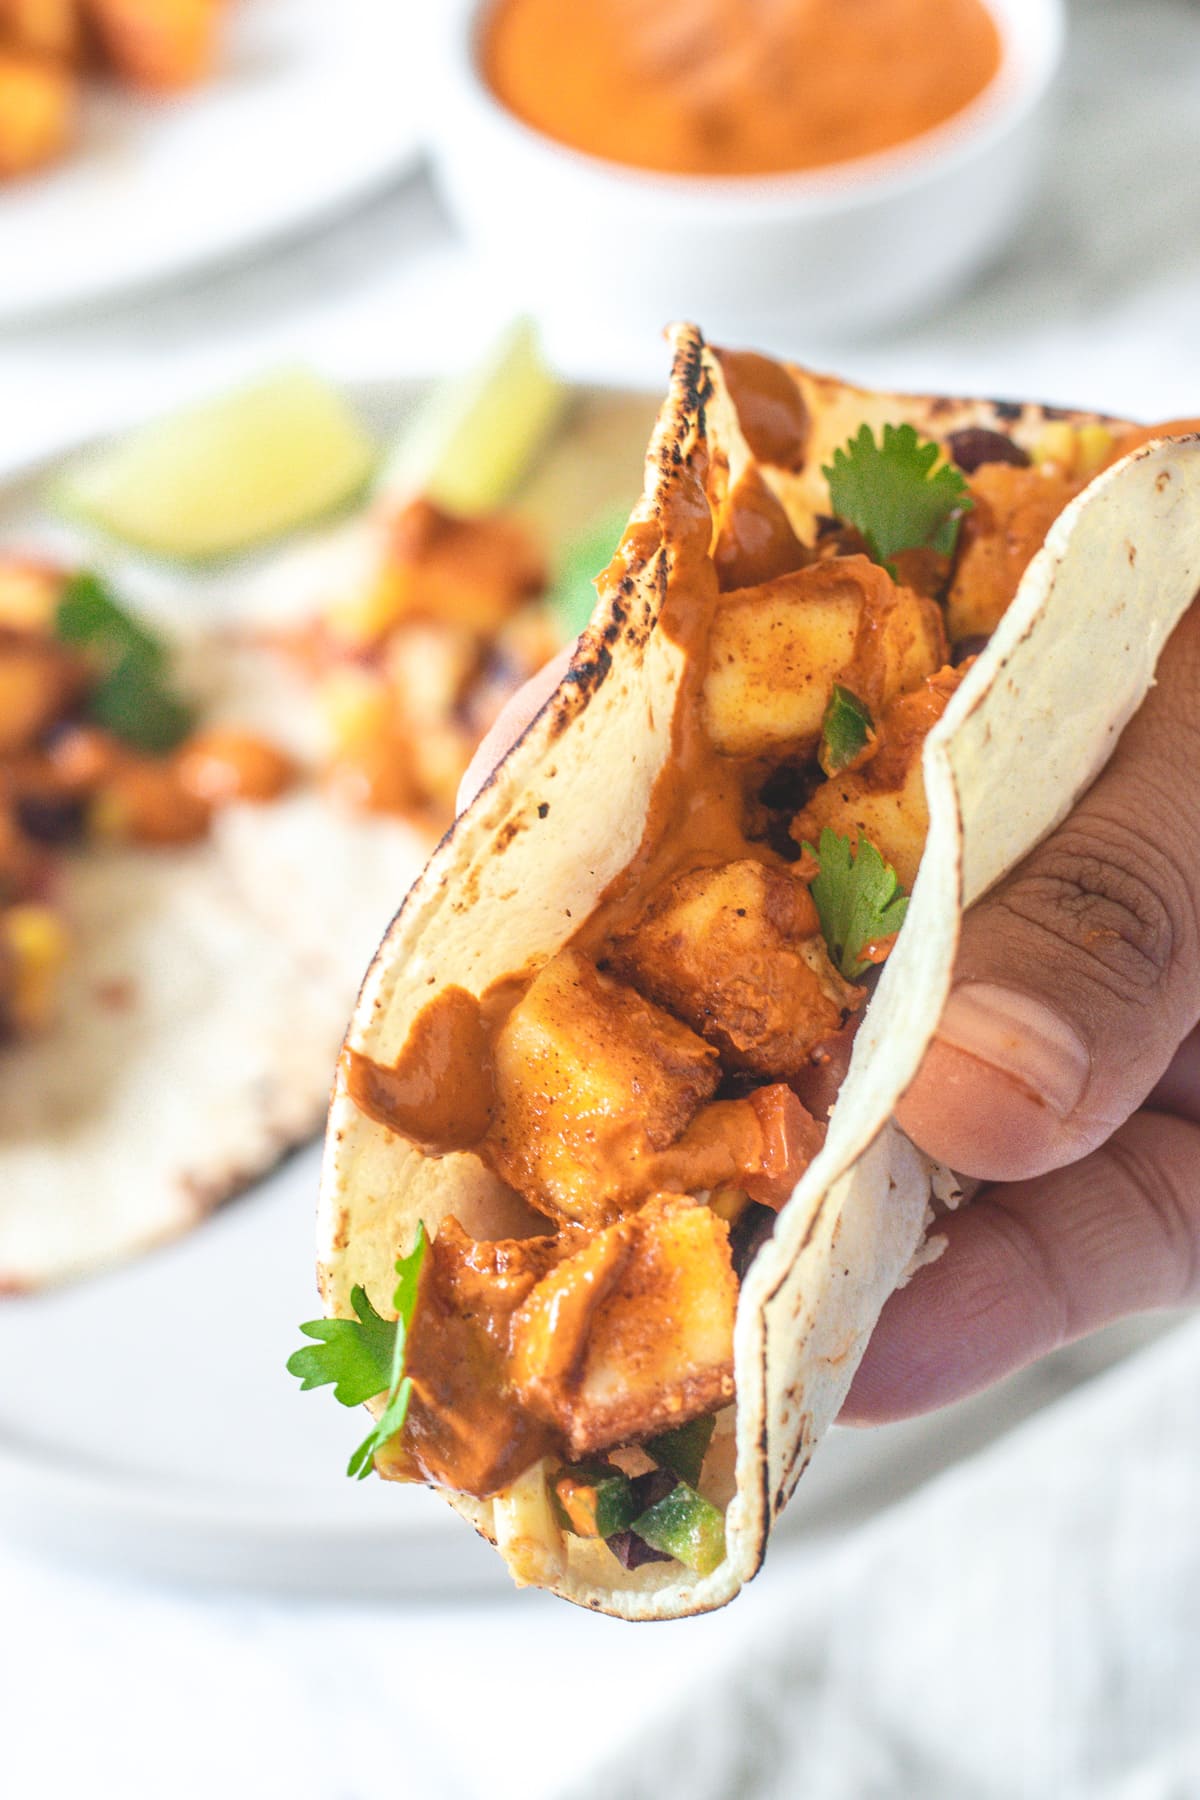 One paneer taco holding in the hand.